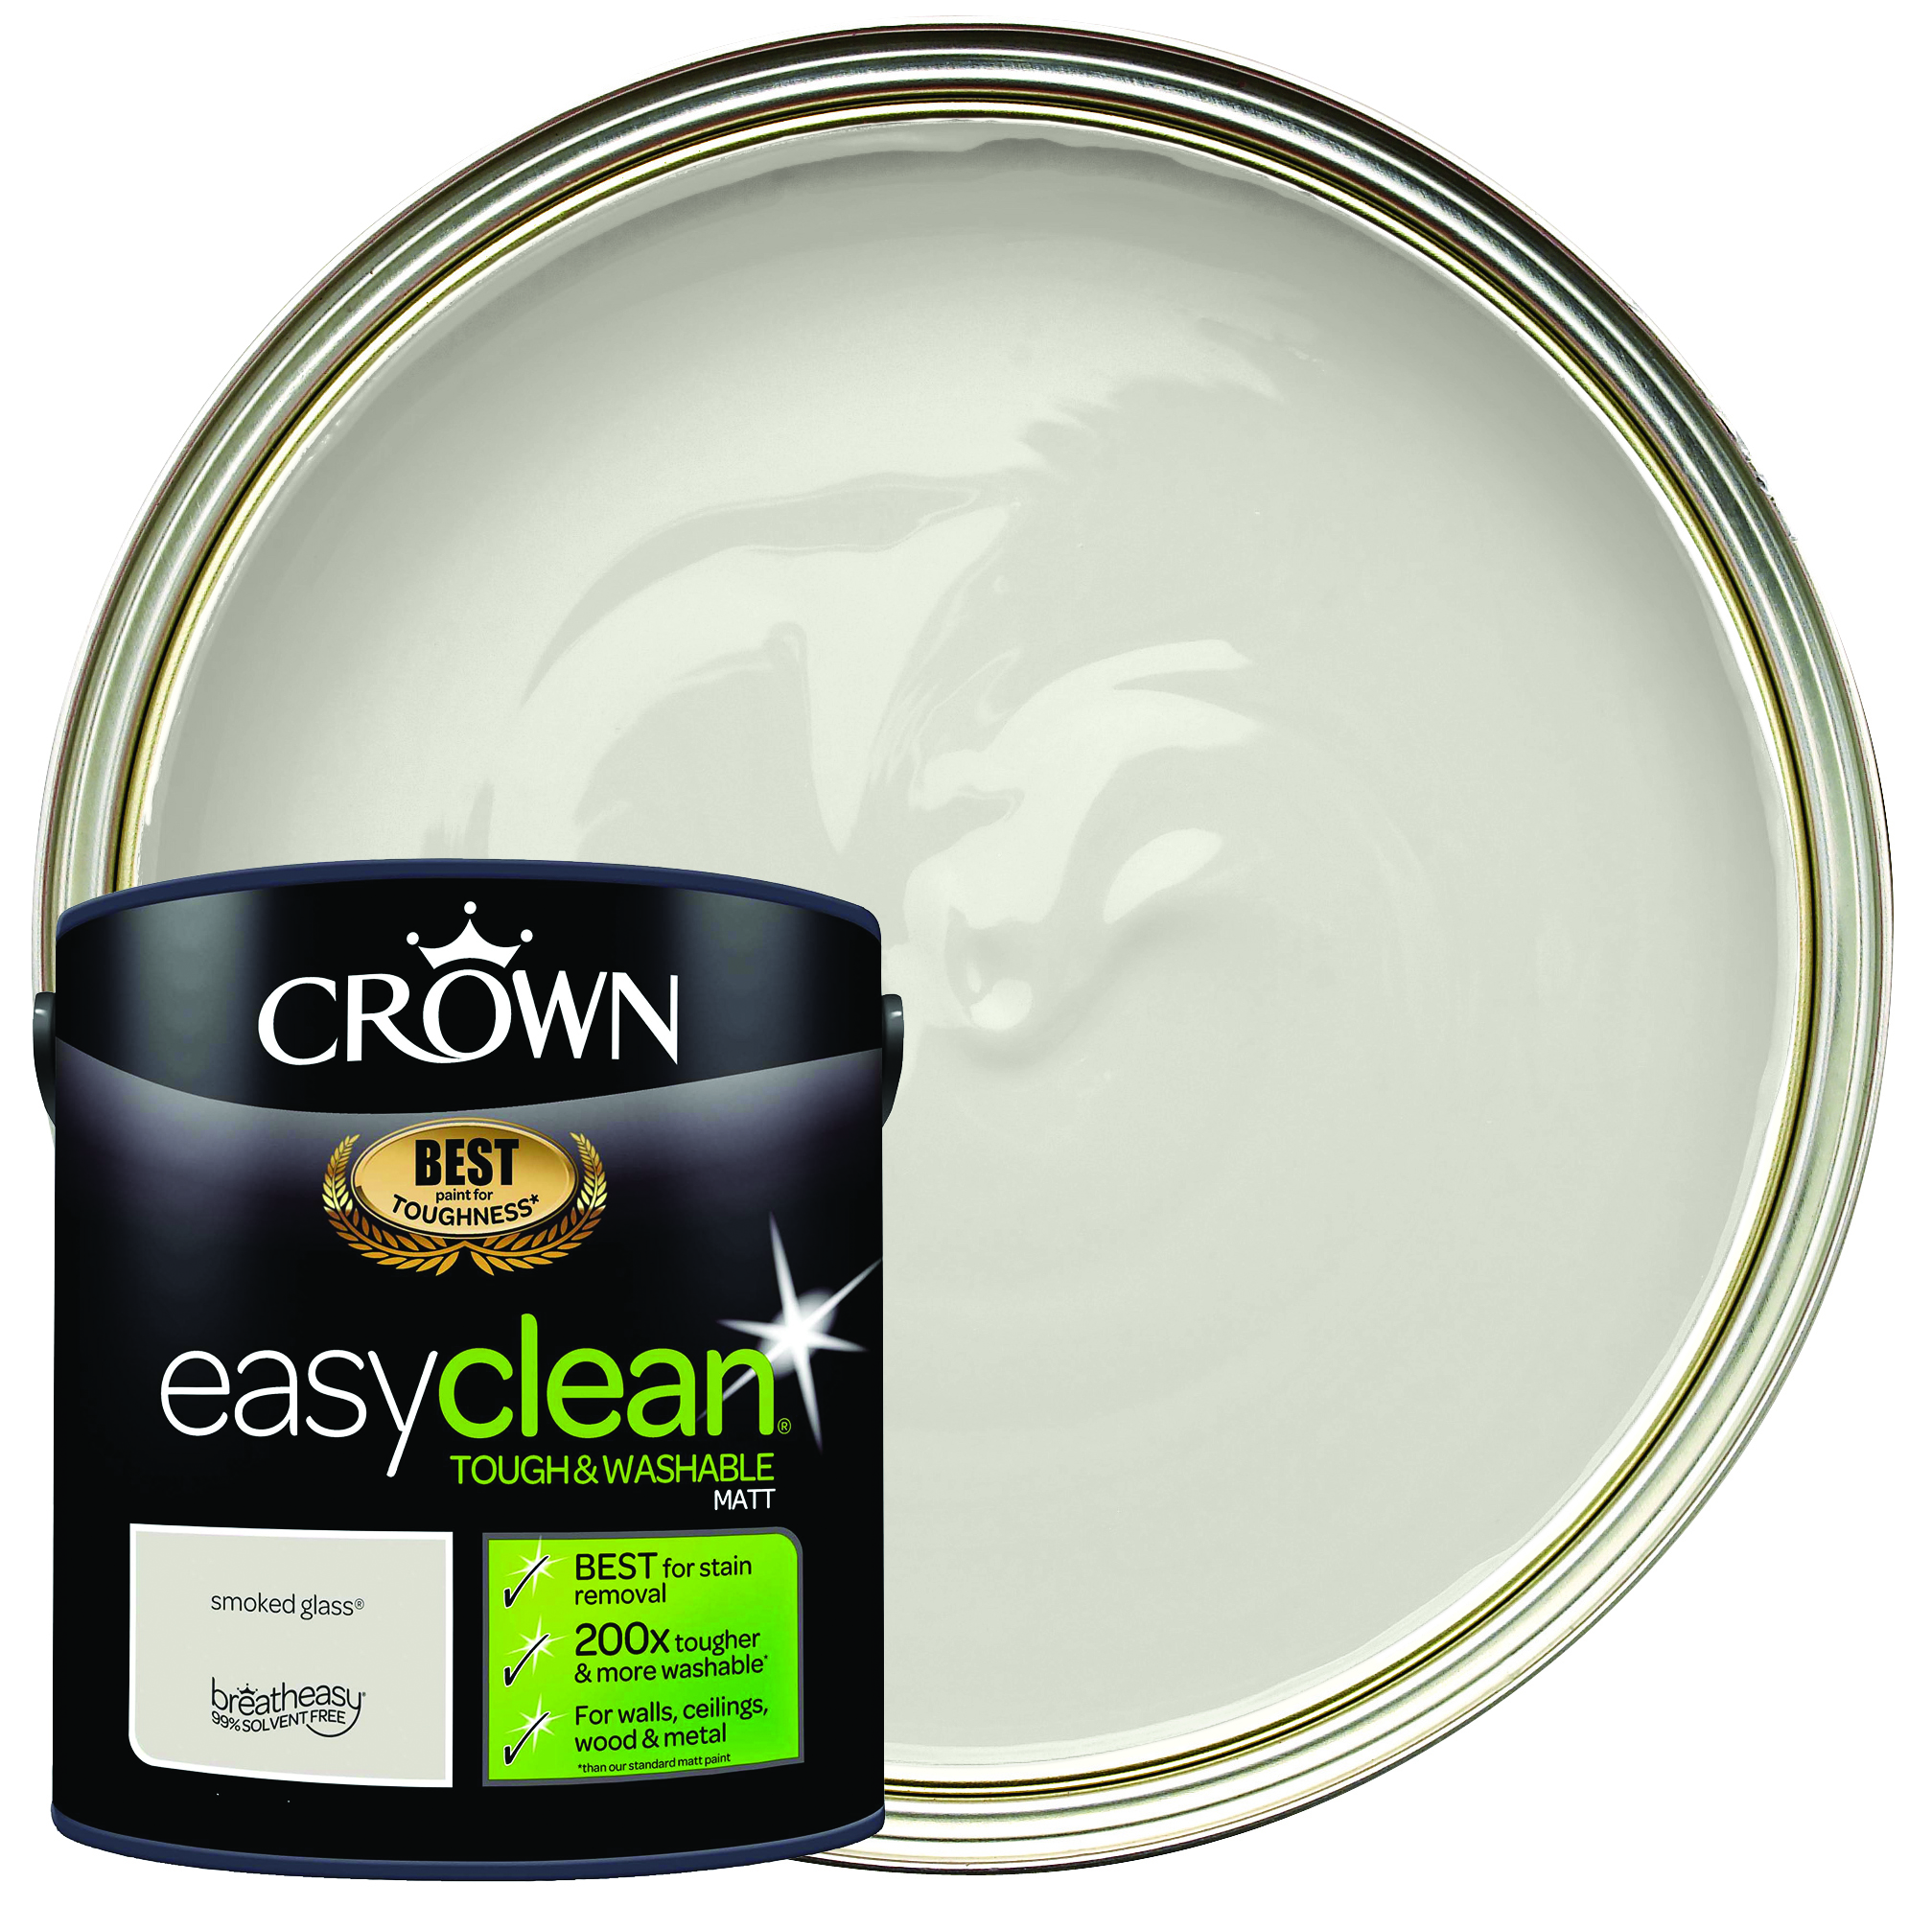 Image of Crown Easyclean Matt Emulsion Paint - Smoked Glass - 2.5L